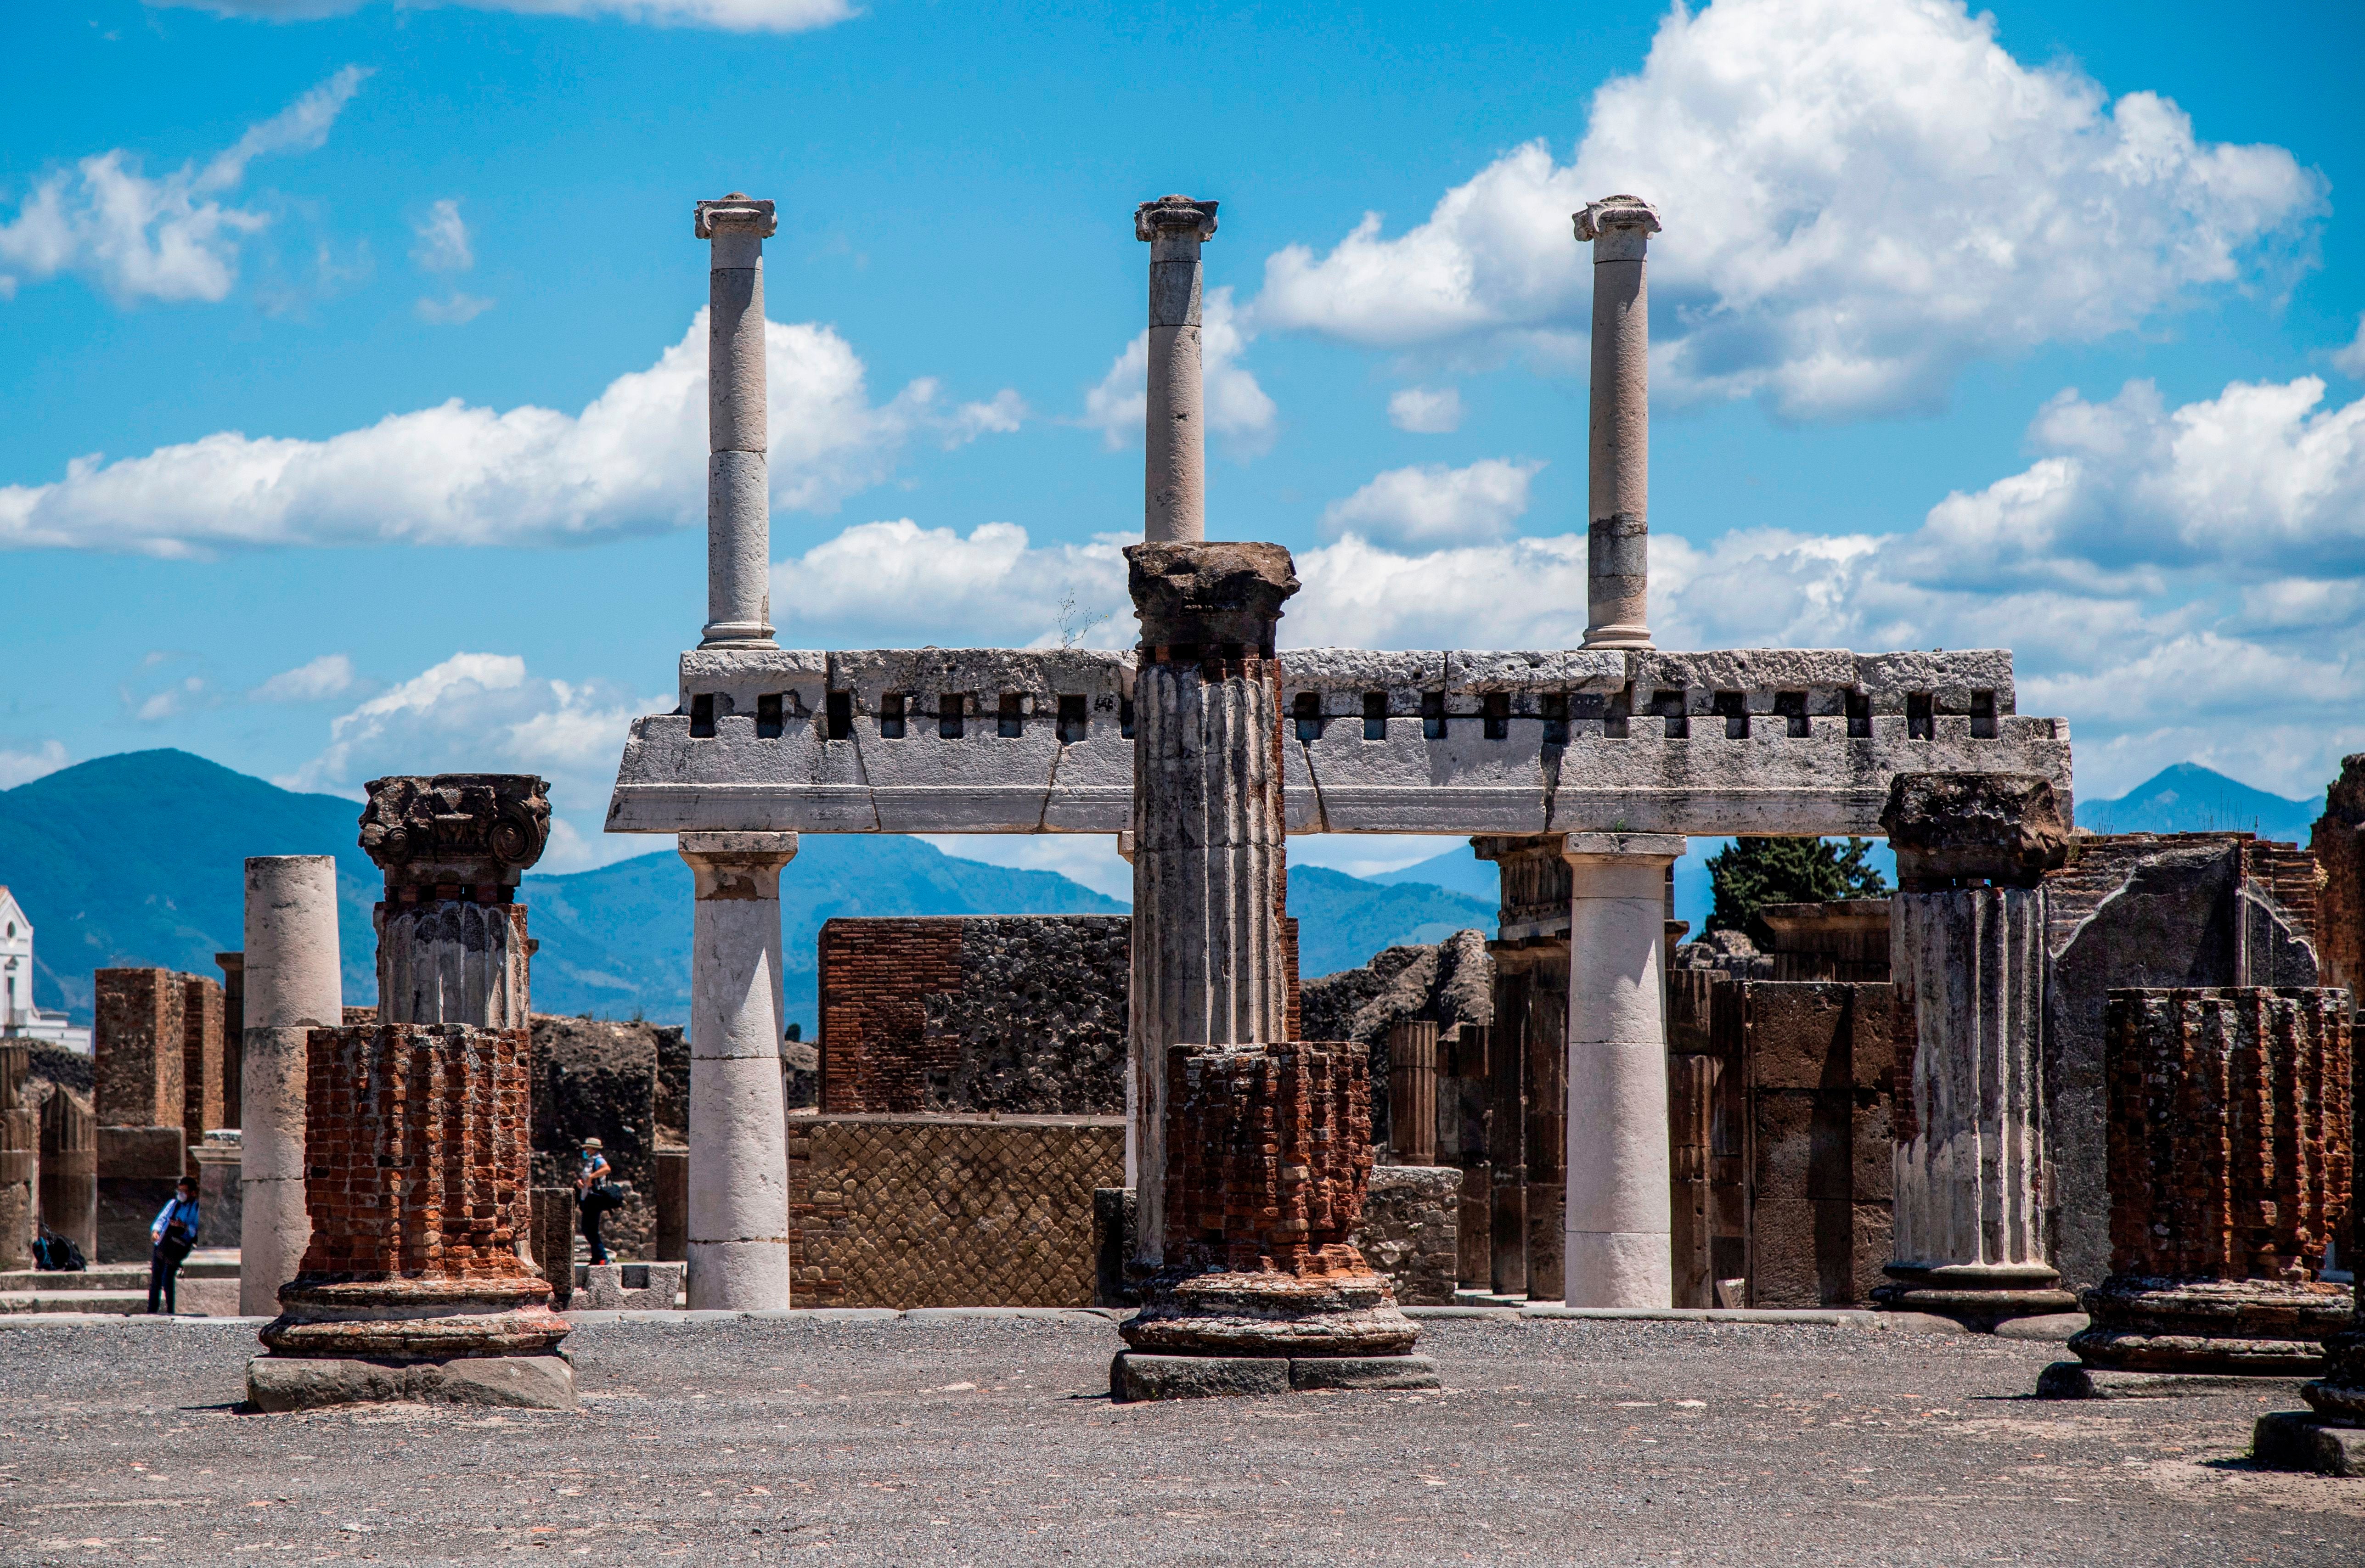 Pompeii is revealing new secrets thanks partly to technological advances